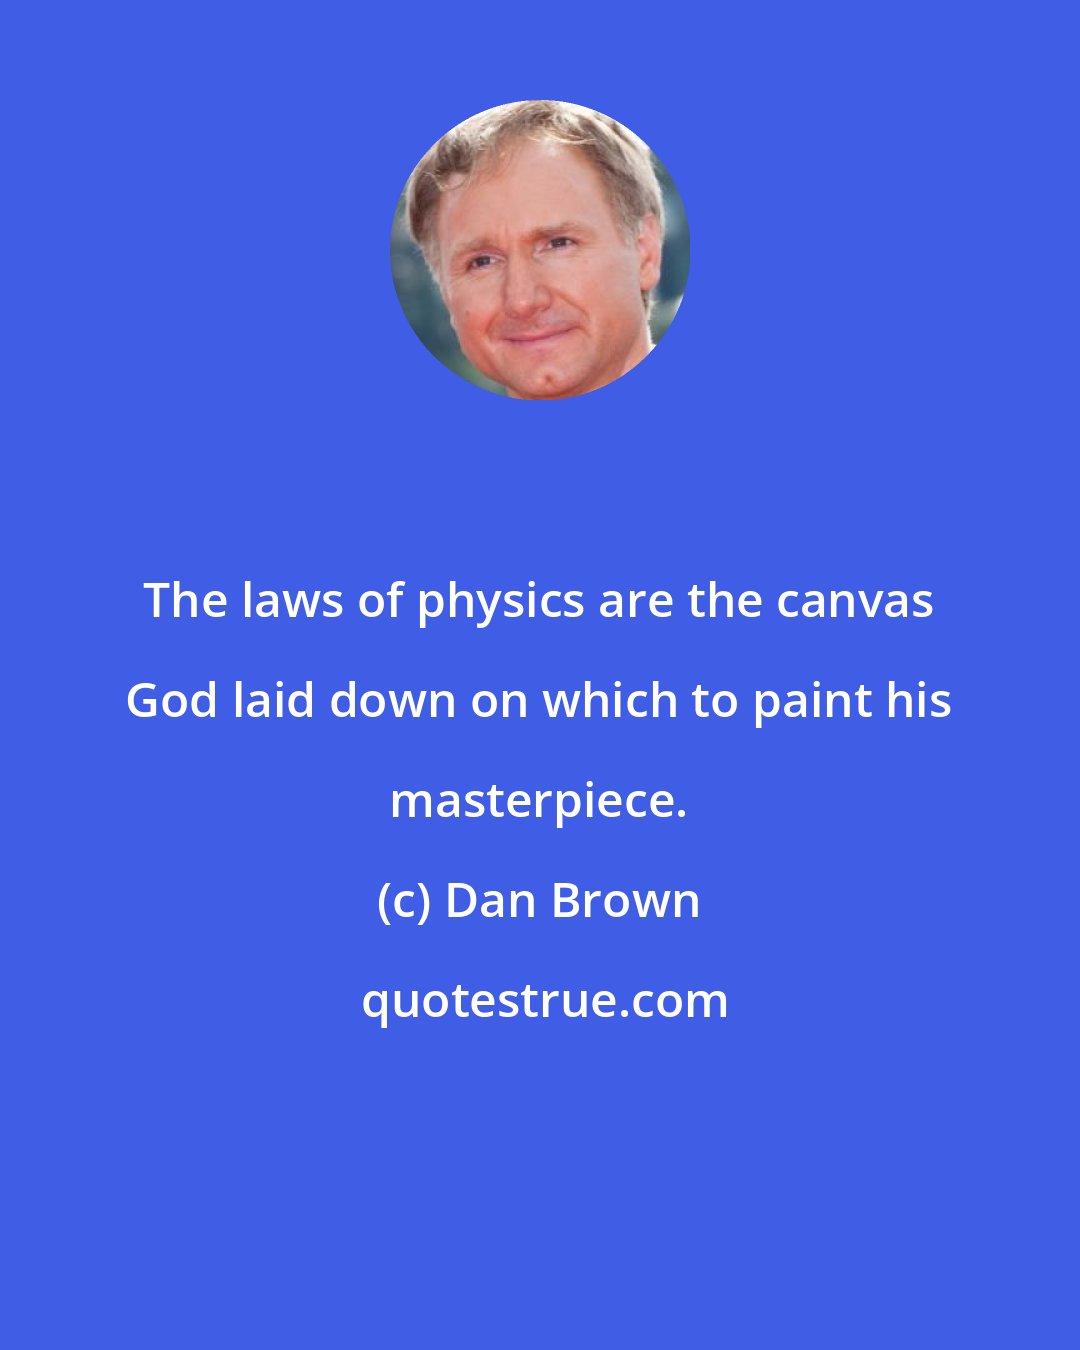 Dan Brown: The laws of physics are the canvas God laid down on which to paint his masterpiece.